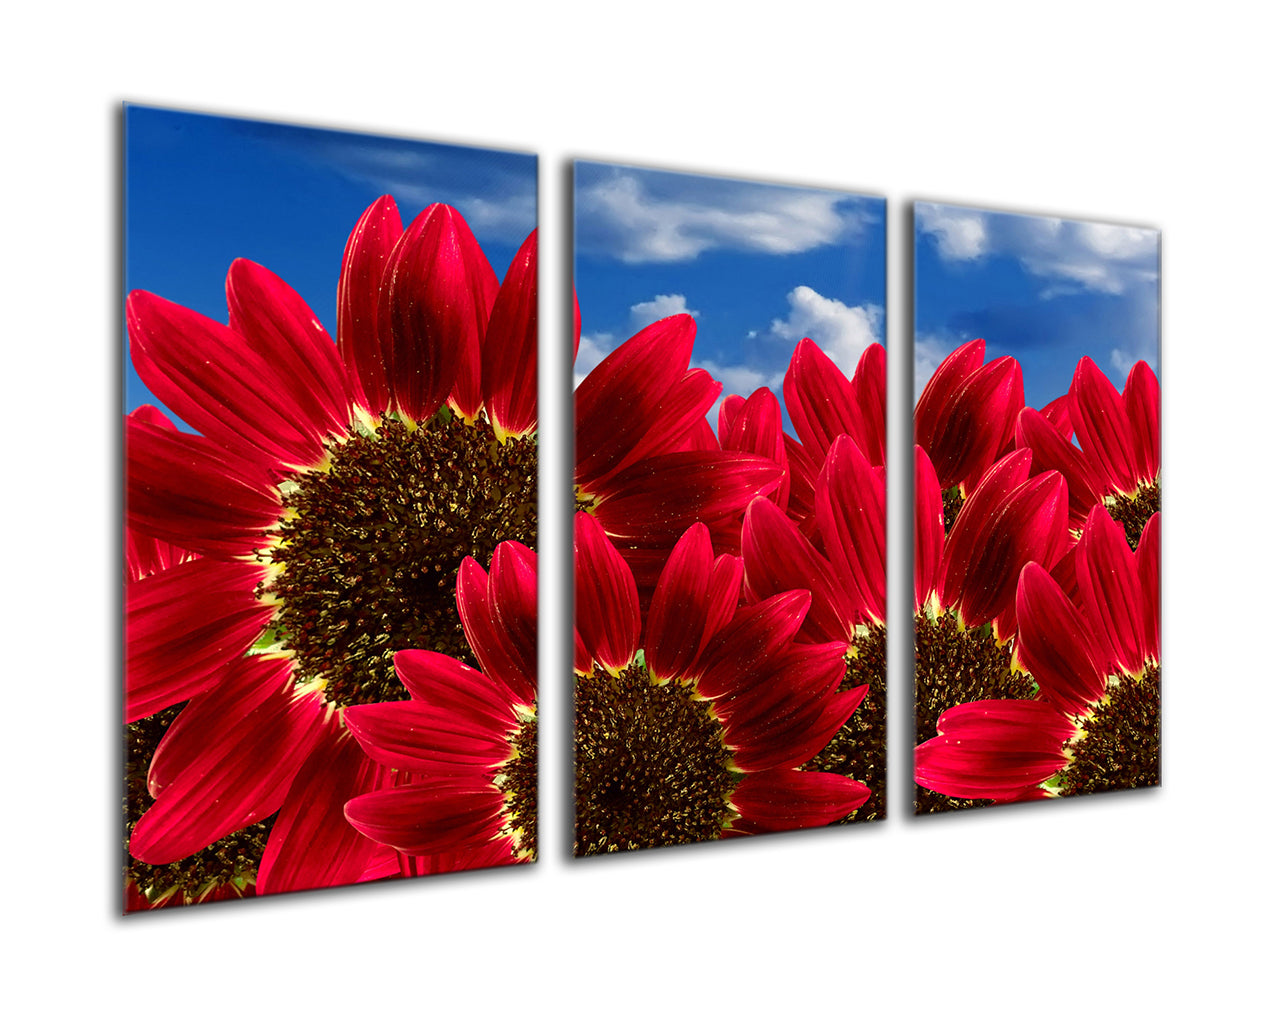 Red sunflowers bunch